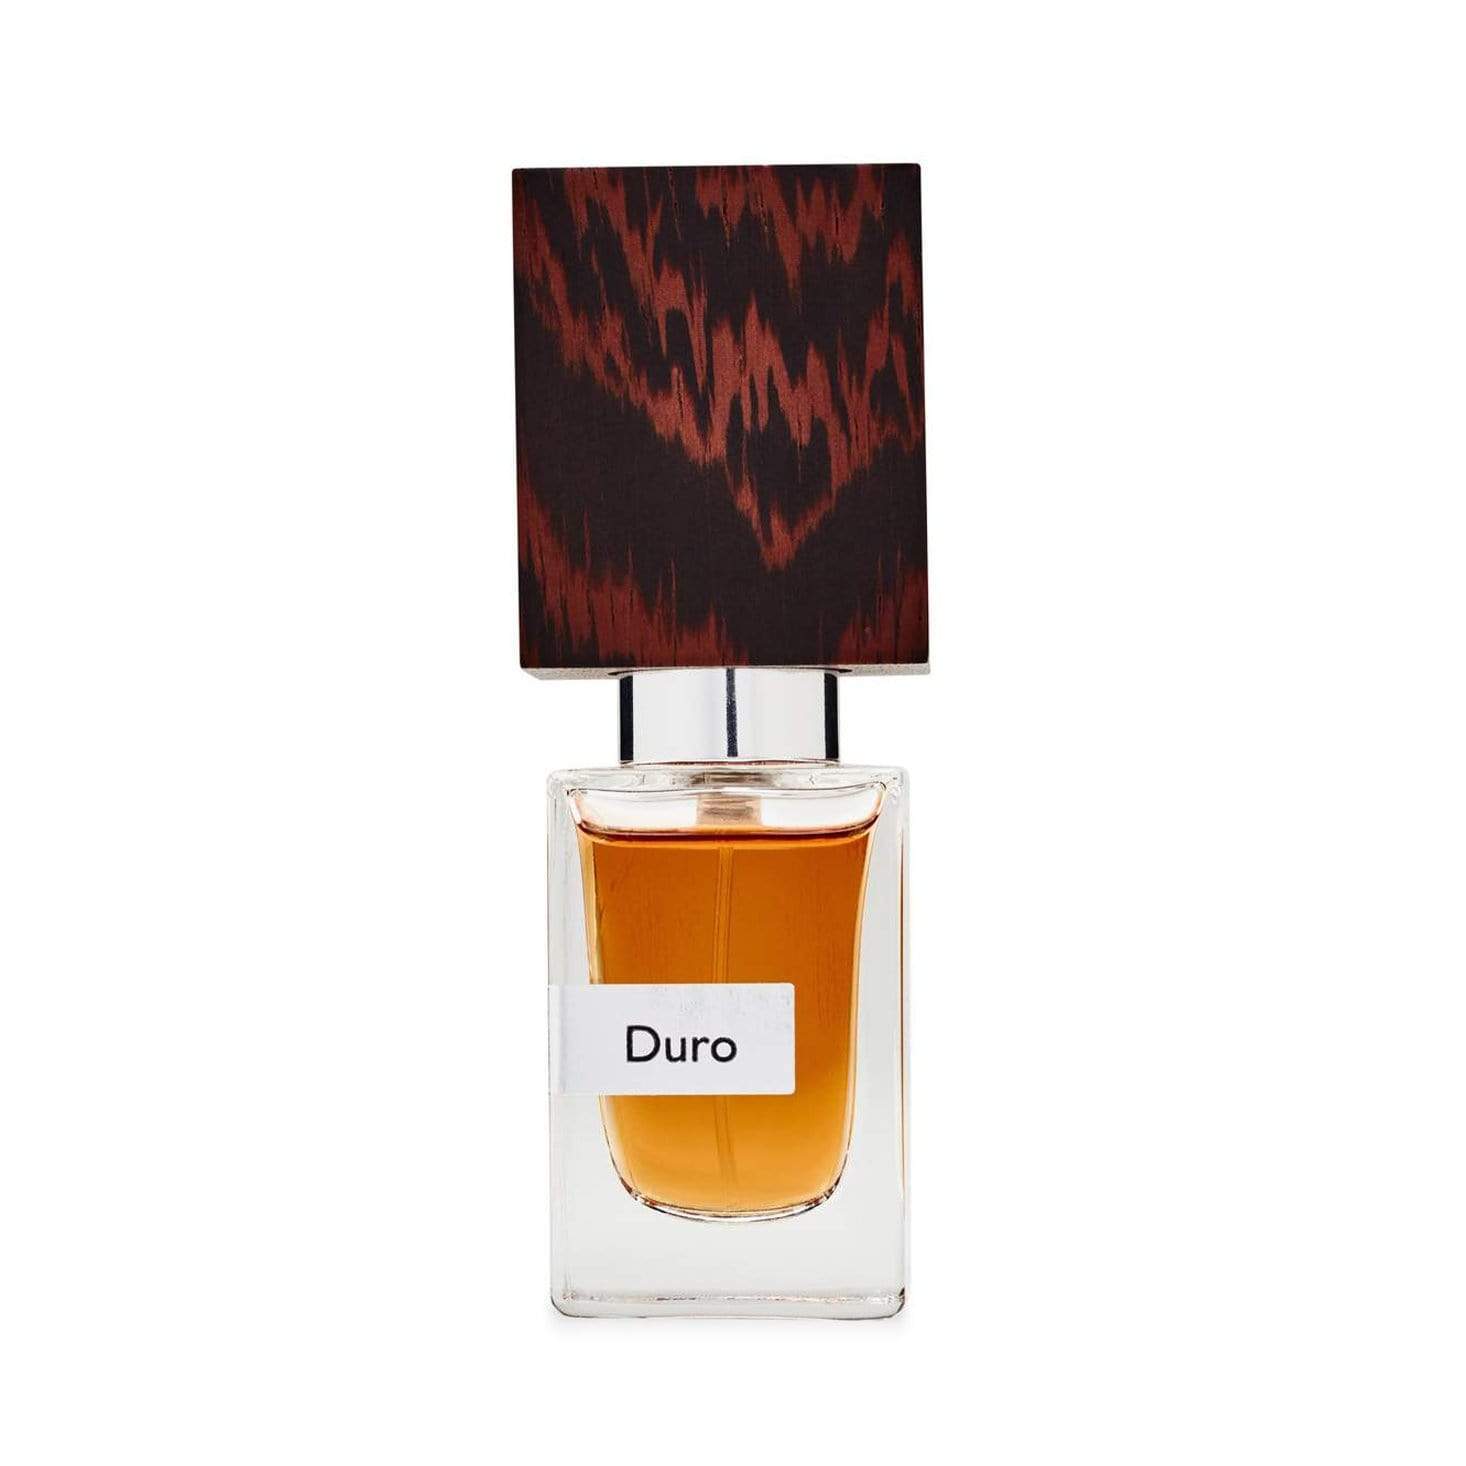 BEON.COM.AU Duro is bold and potent, untamed and virile... a raw and gorgeous Parfum Extrait that is an exotic mix of male sensuality and scent. Carnal and classy with a modern crisp edge, Duro takes inspiration from raw materials, situations and nature. It has a distinctly masculine edge, dedicated to those... Nasomatto at BEON.COM.AU